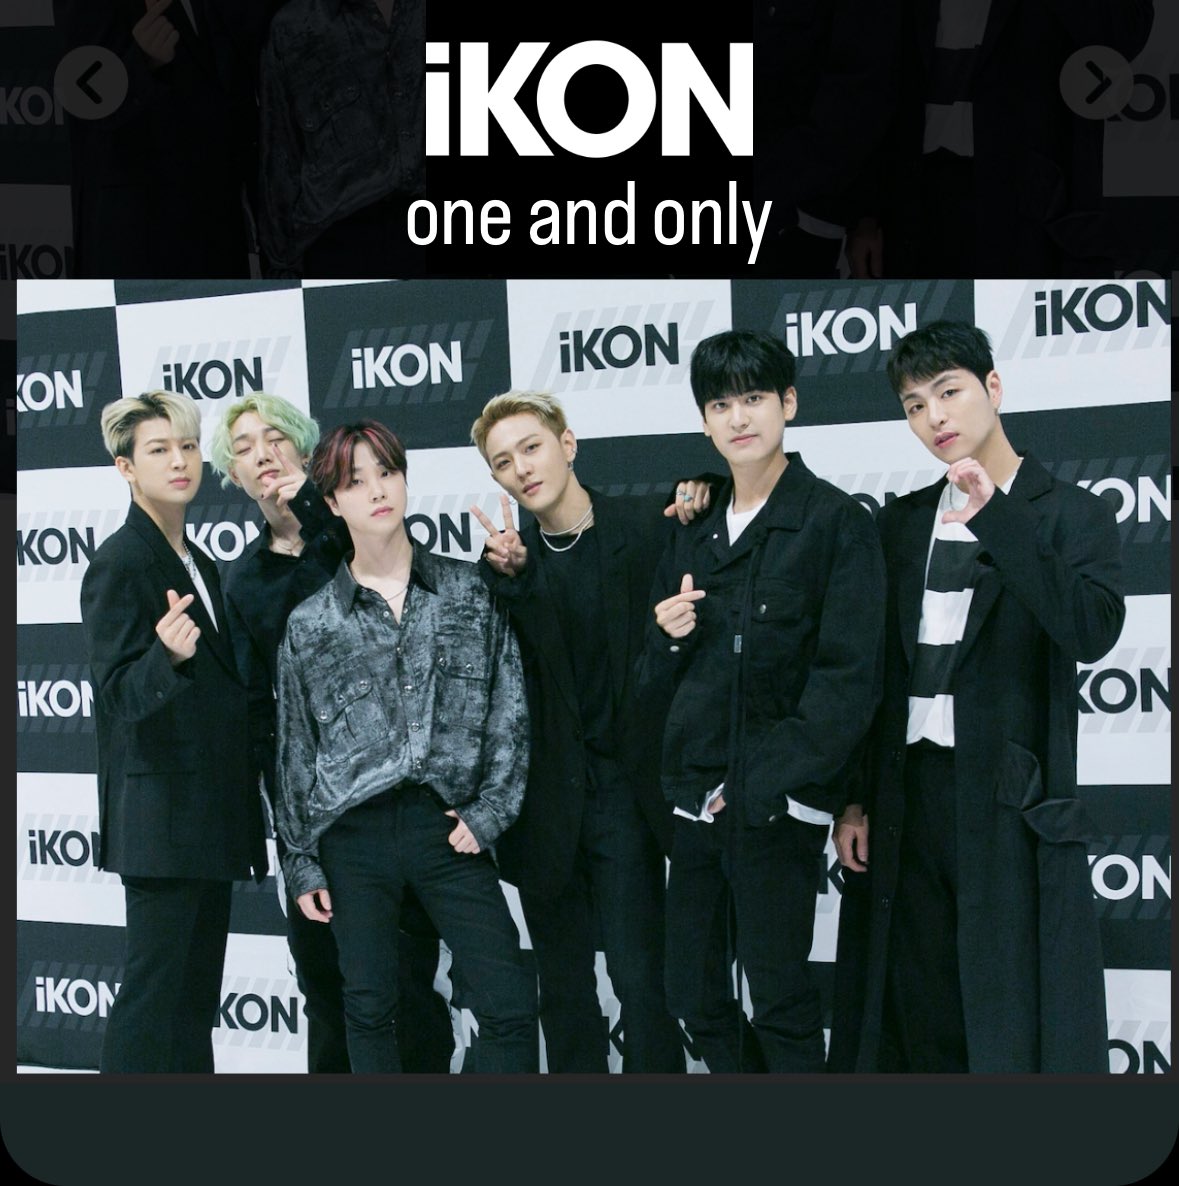 #RESPECTiKON #iKONnotEYEKONS
#iKON #아이콘 #hybe @HYBEOFFICIALtwt @GeffenRecords

One And Only🫰